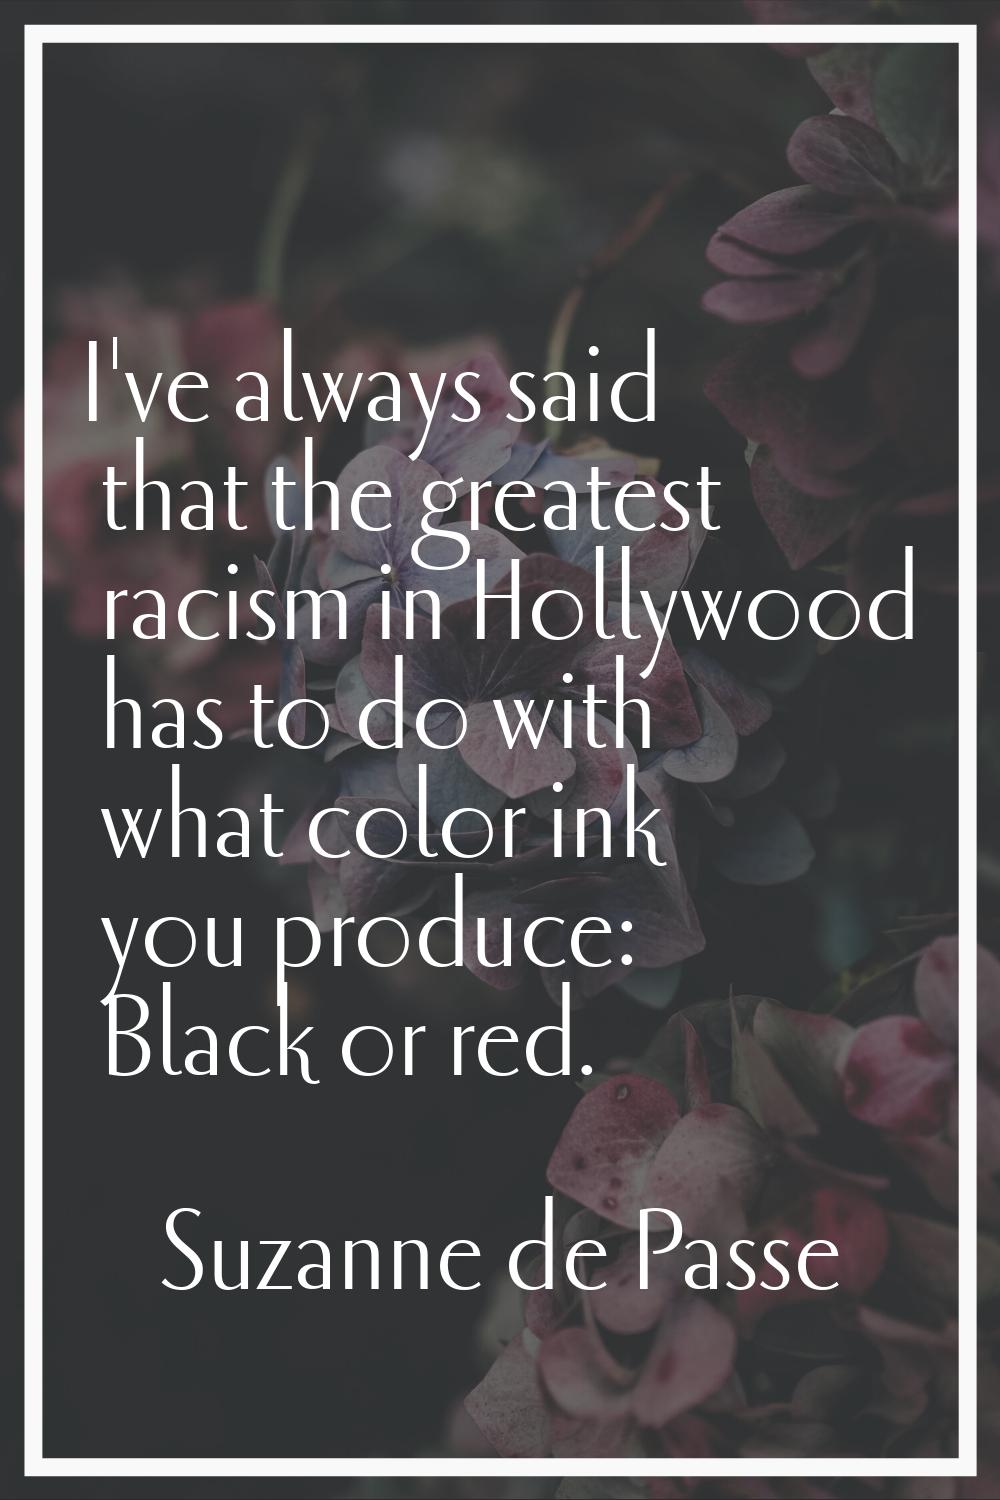 I've always said that the greatest racism in Hollywood has to do with what color ink you produce: B